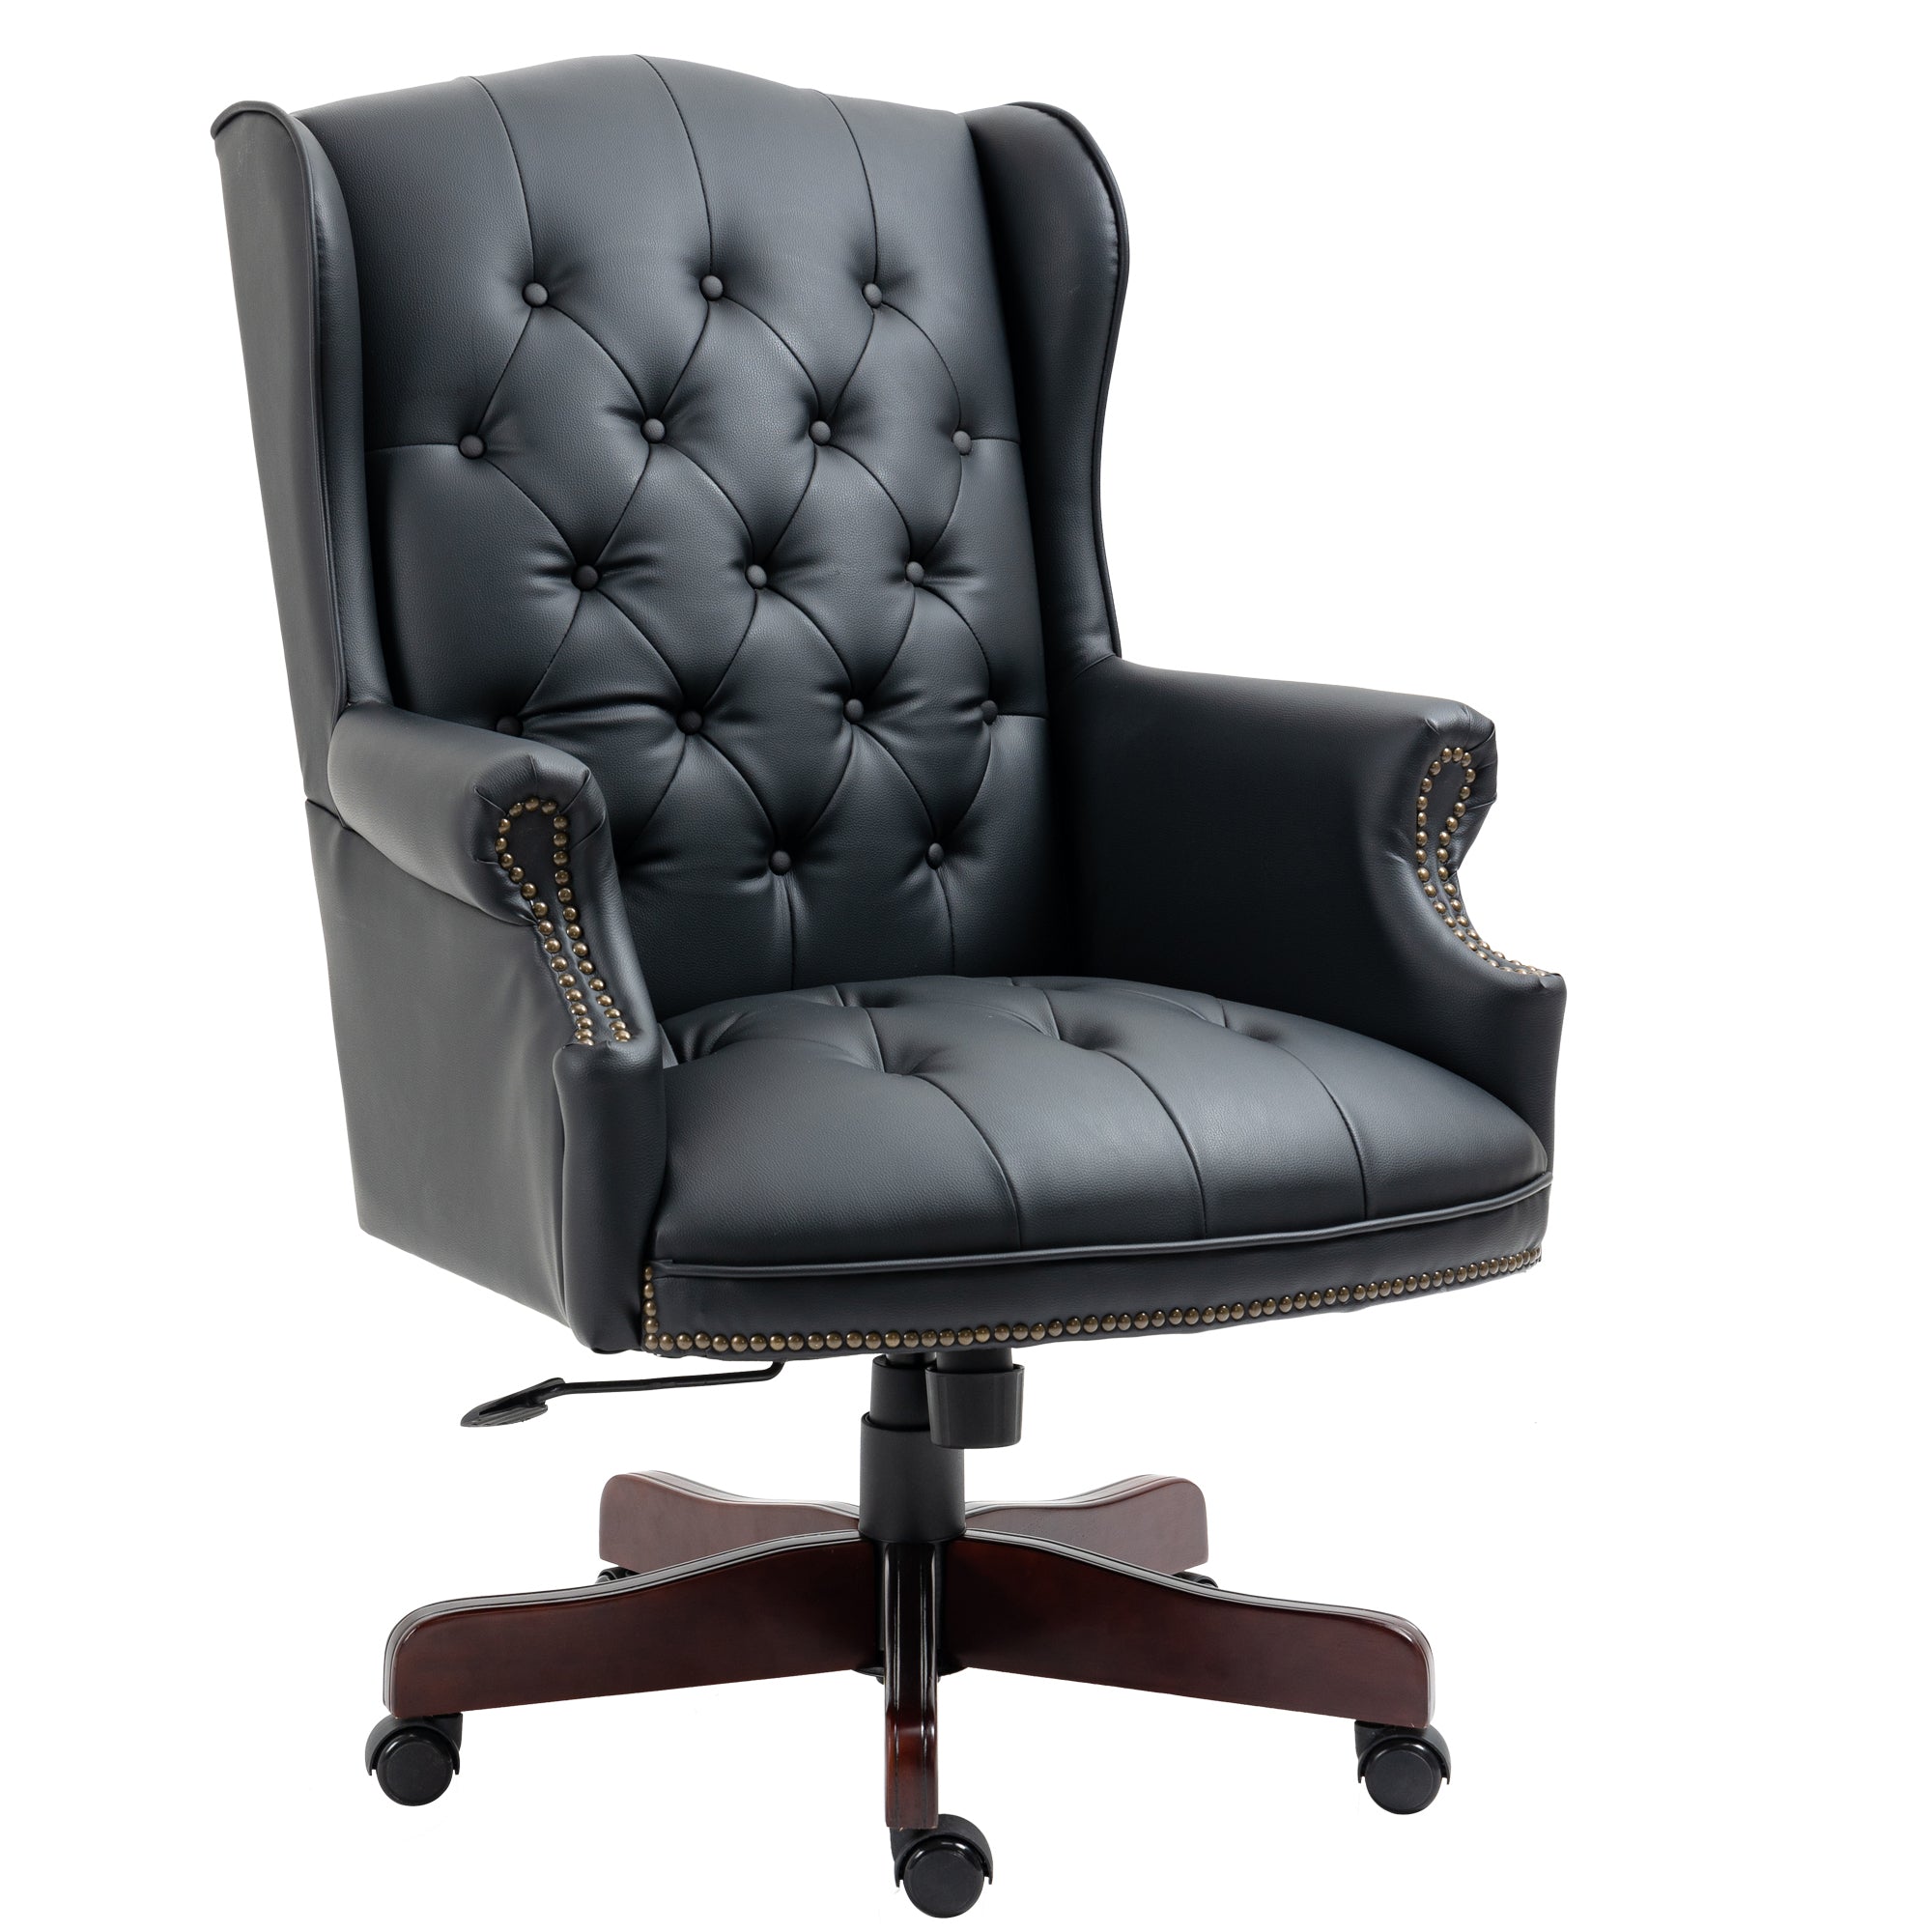 Executive Office Chair - High Back Reclining Comfortable Desk Chair